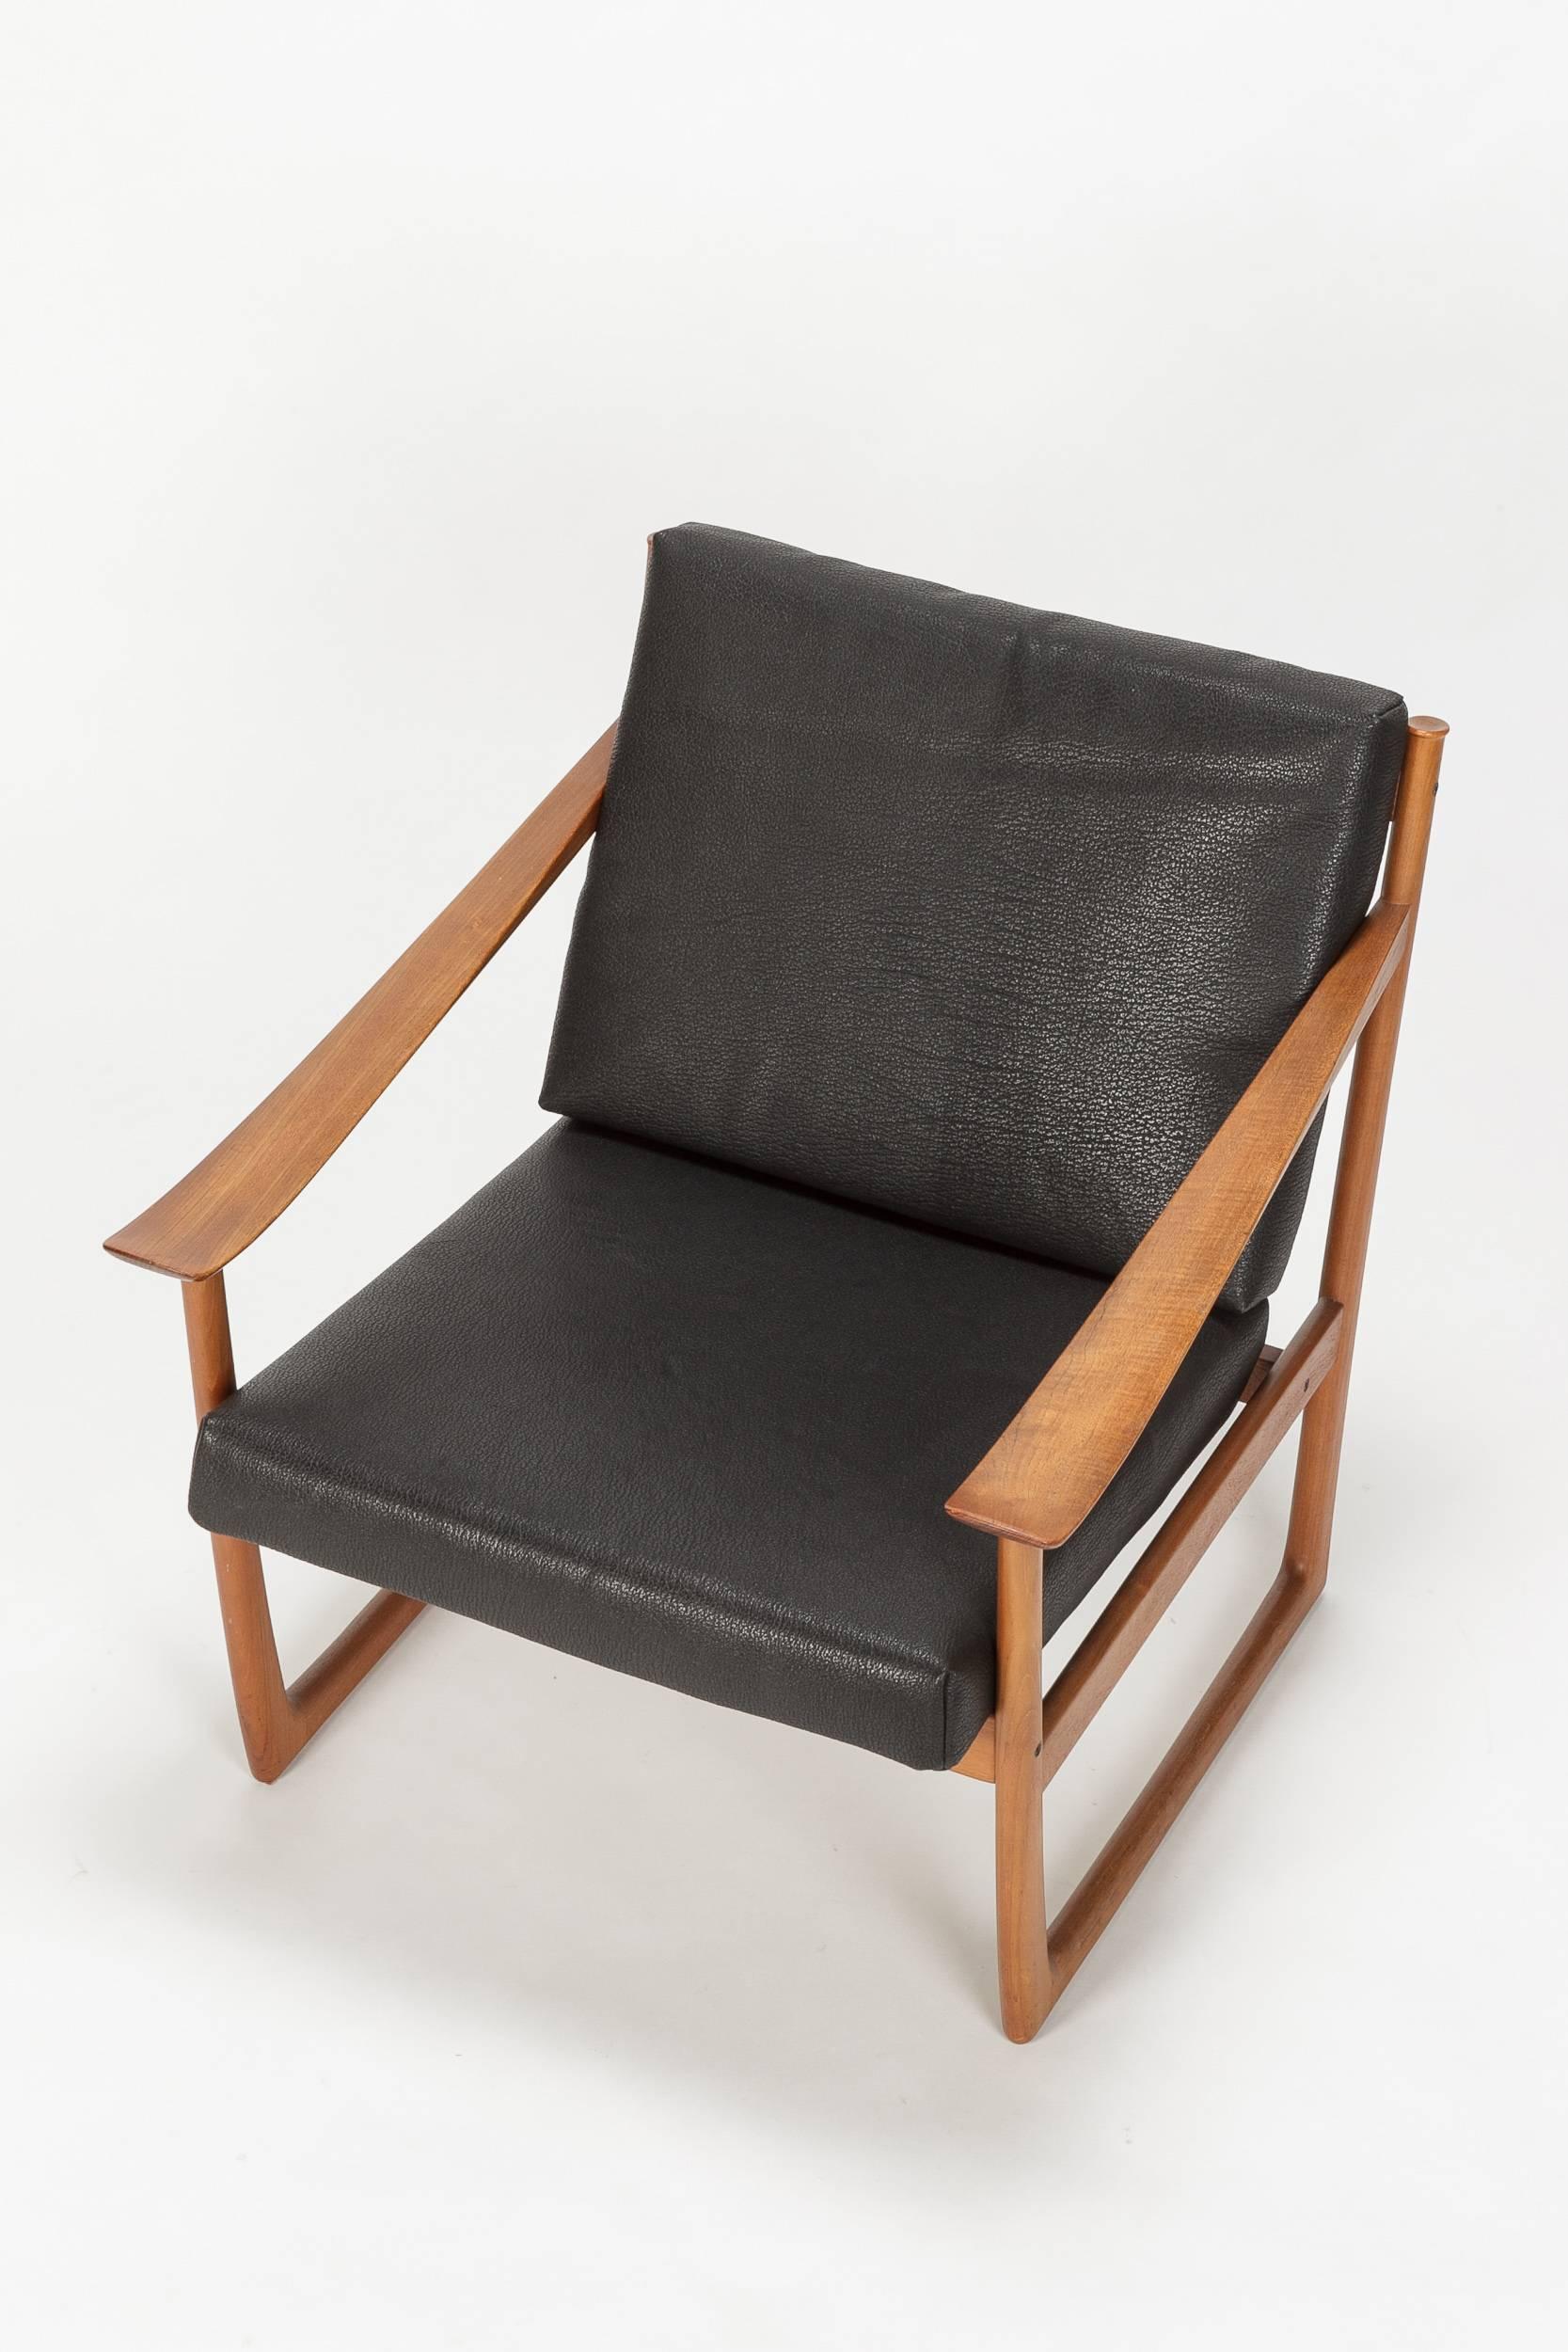 High-end pair of Peter Hvidt & Orla Mølgaard Nielsen lounge chairs model “Sled” or model number FD130, manufactured by France & Son in Denmark in the 1960s. Frame is made of solid teak with skids, very elegantly shaped armrests with wonderful